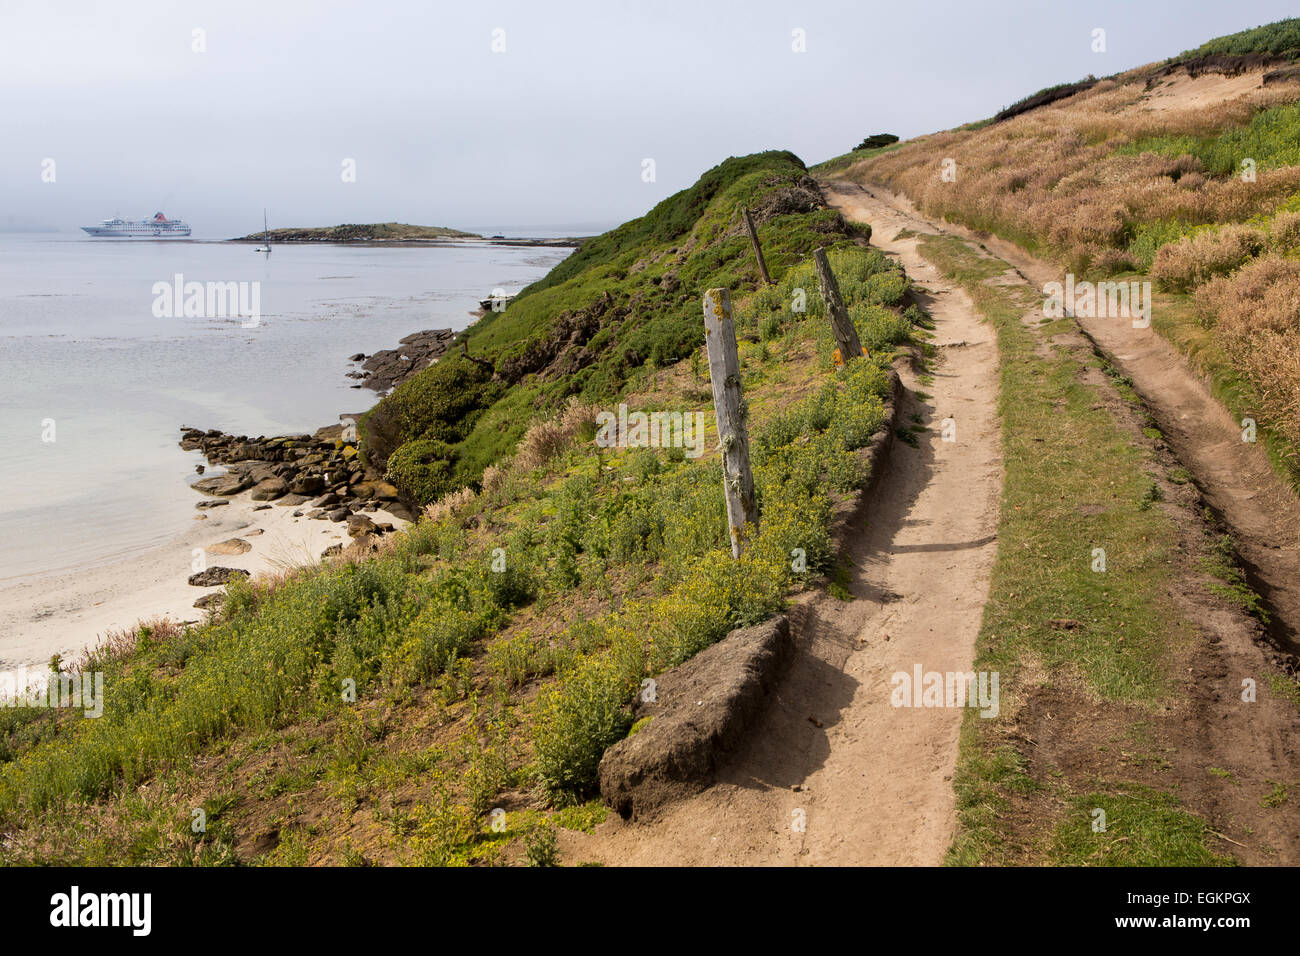 South Atlantic, Falklands, New Island, road to settlement Stock Photo